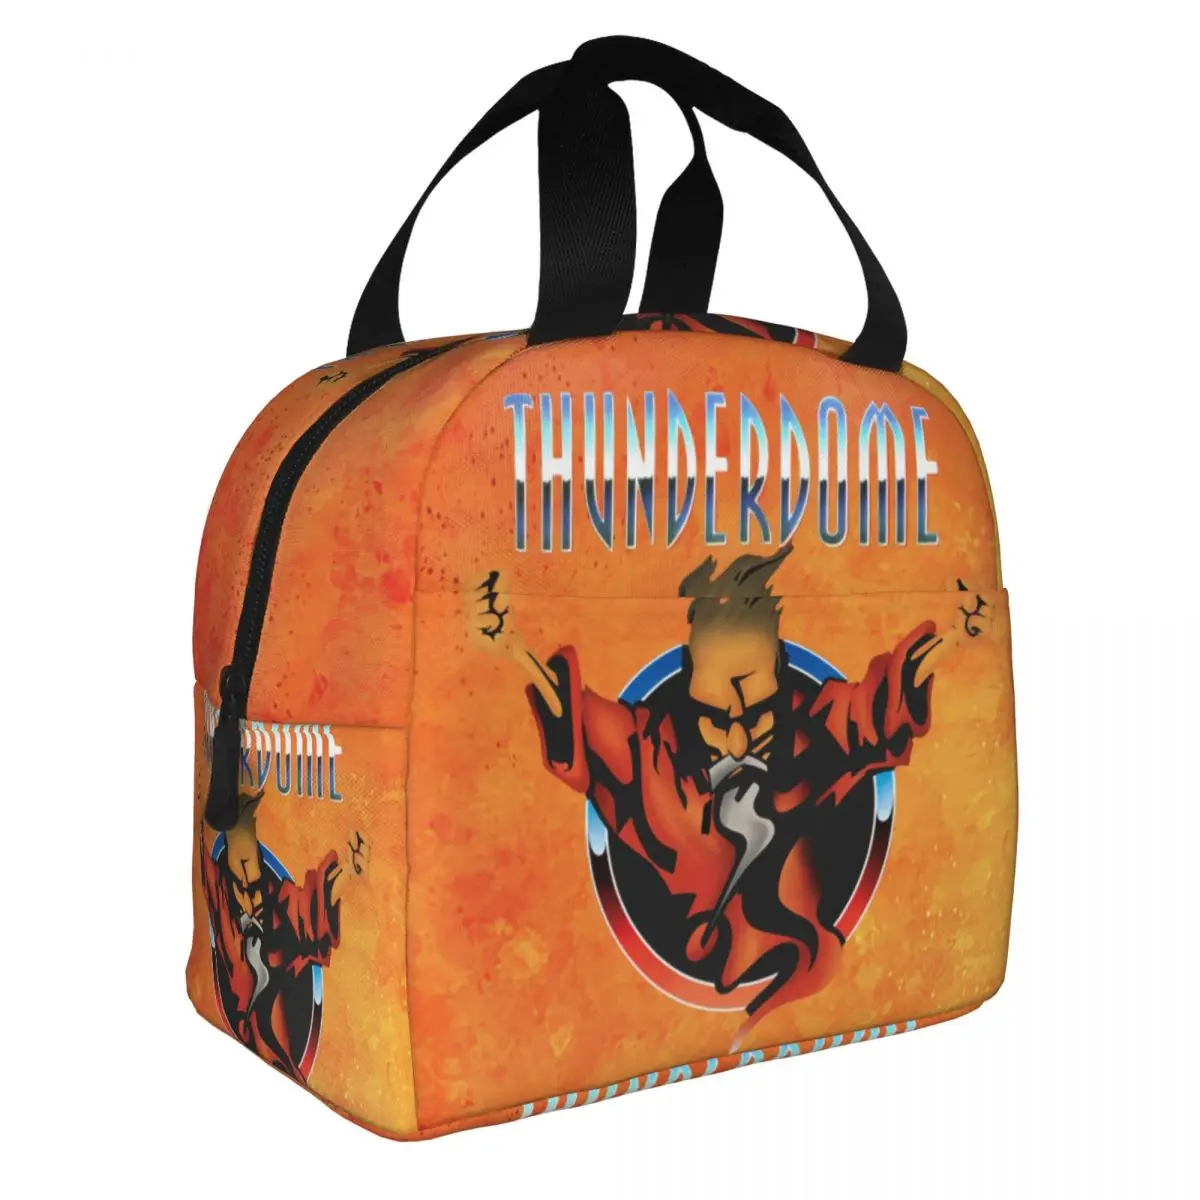 Thunderdome Insulated Lunch Bag Hardcore Gabber Leakproof Thermal Cooler Bento Box for Women Kids Work School Picnic Food Bags